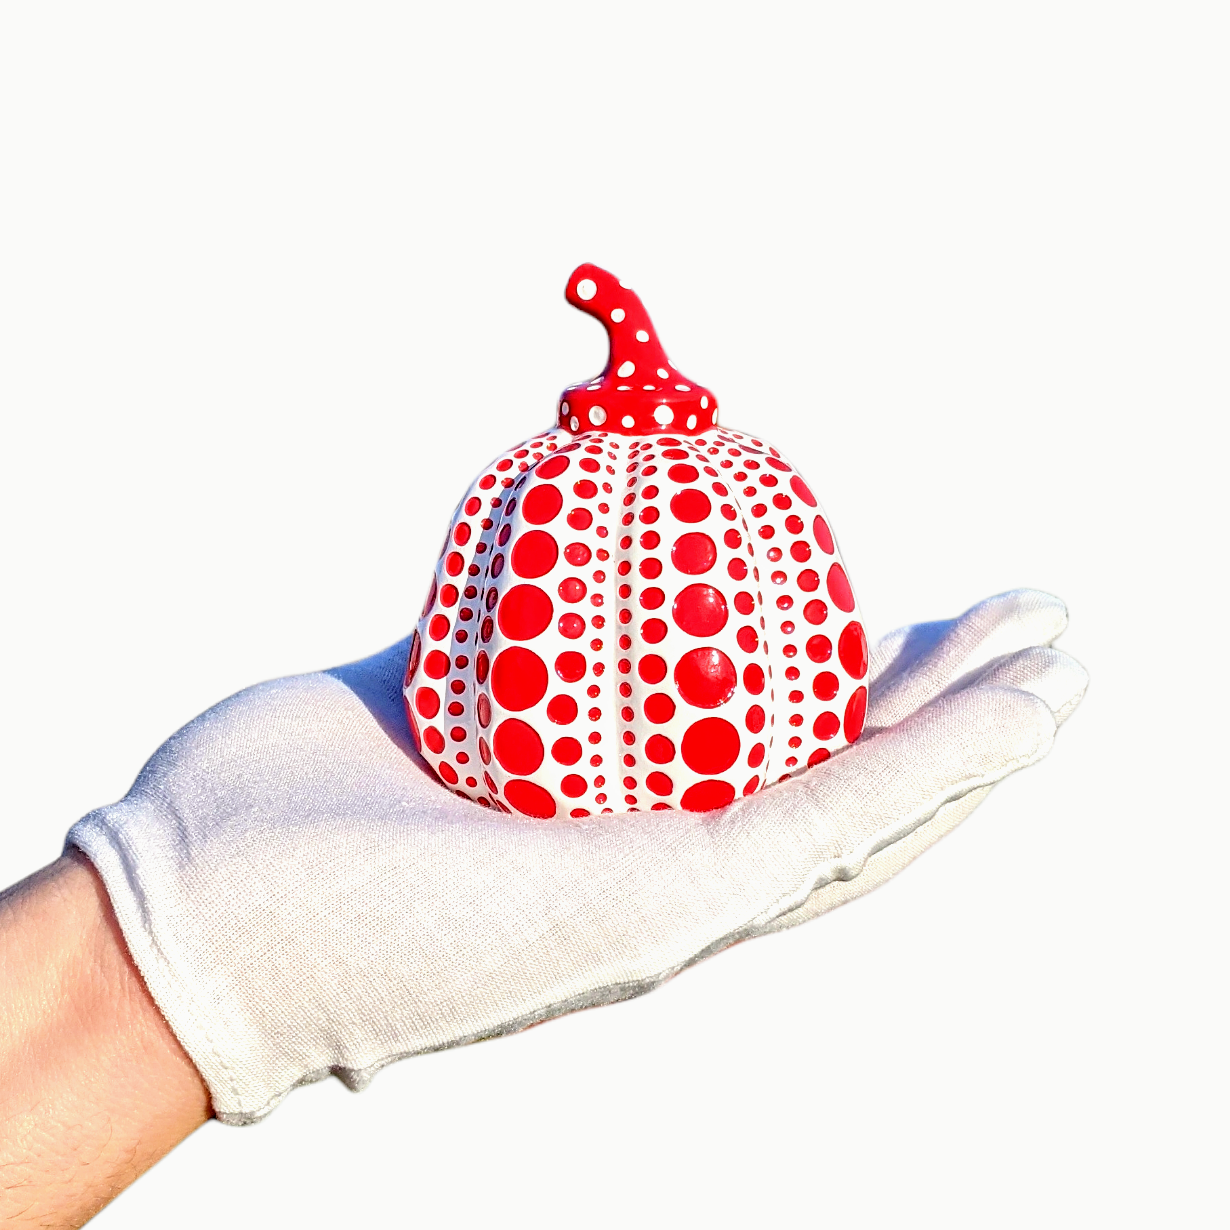 Yayoi Kusama Pumpkin (Red), 2015 Painted cast resin 4 x 3.15 x 3.25 in